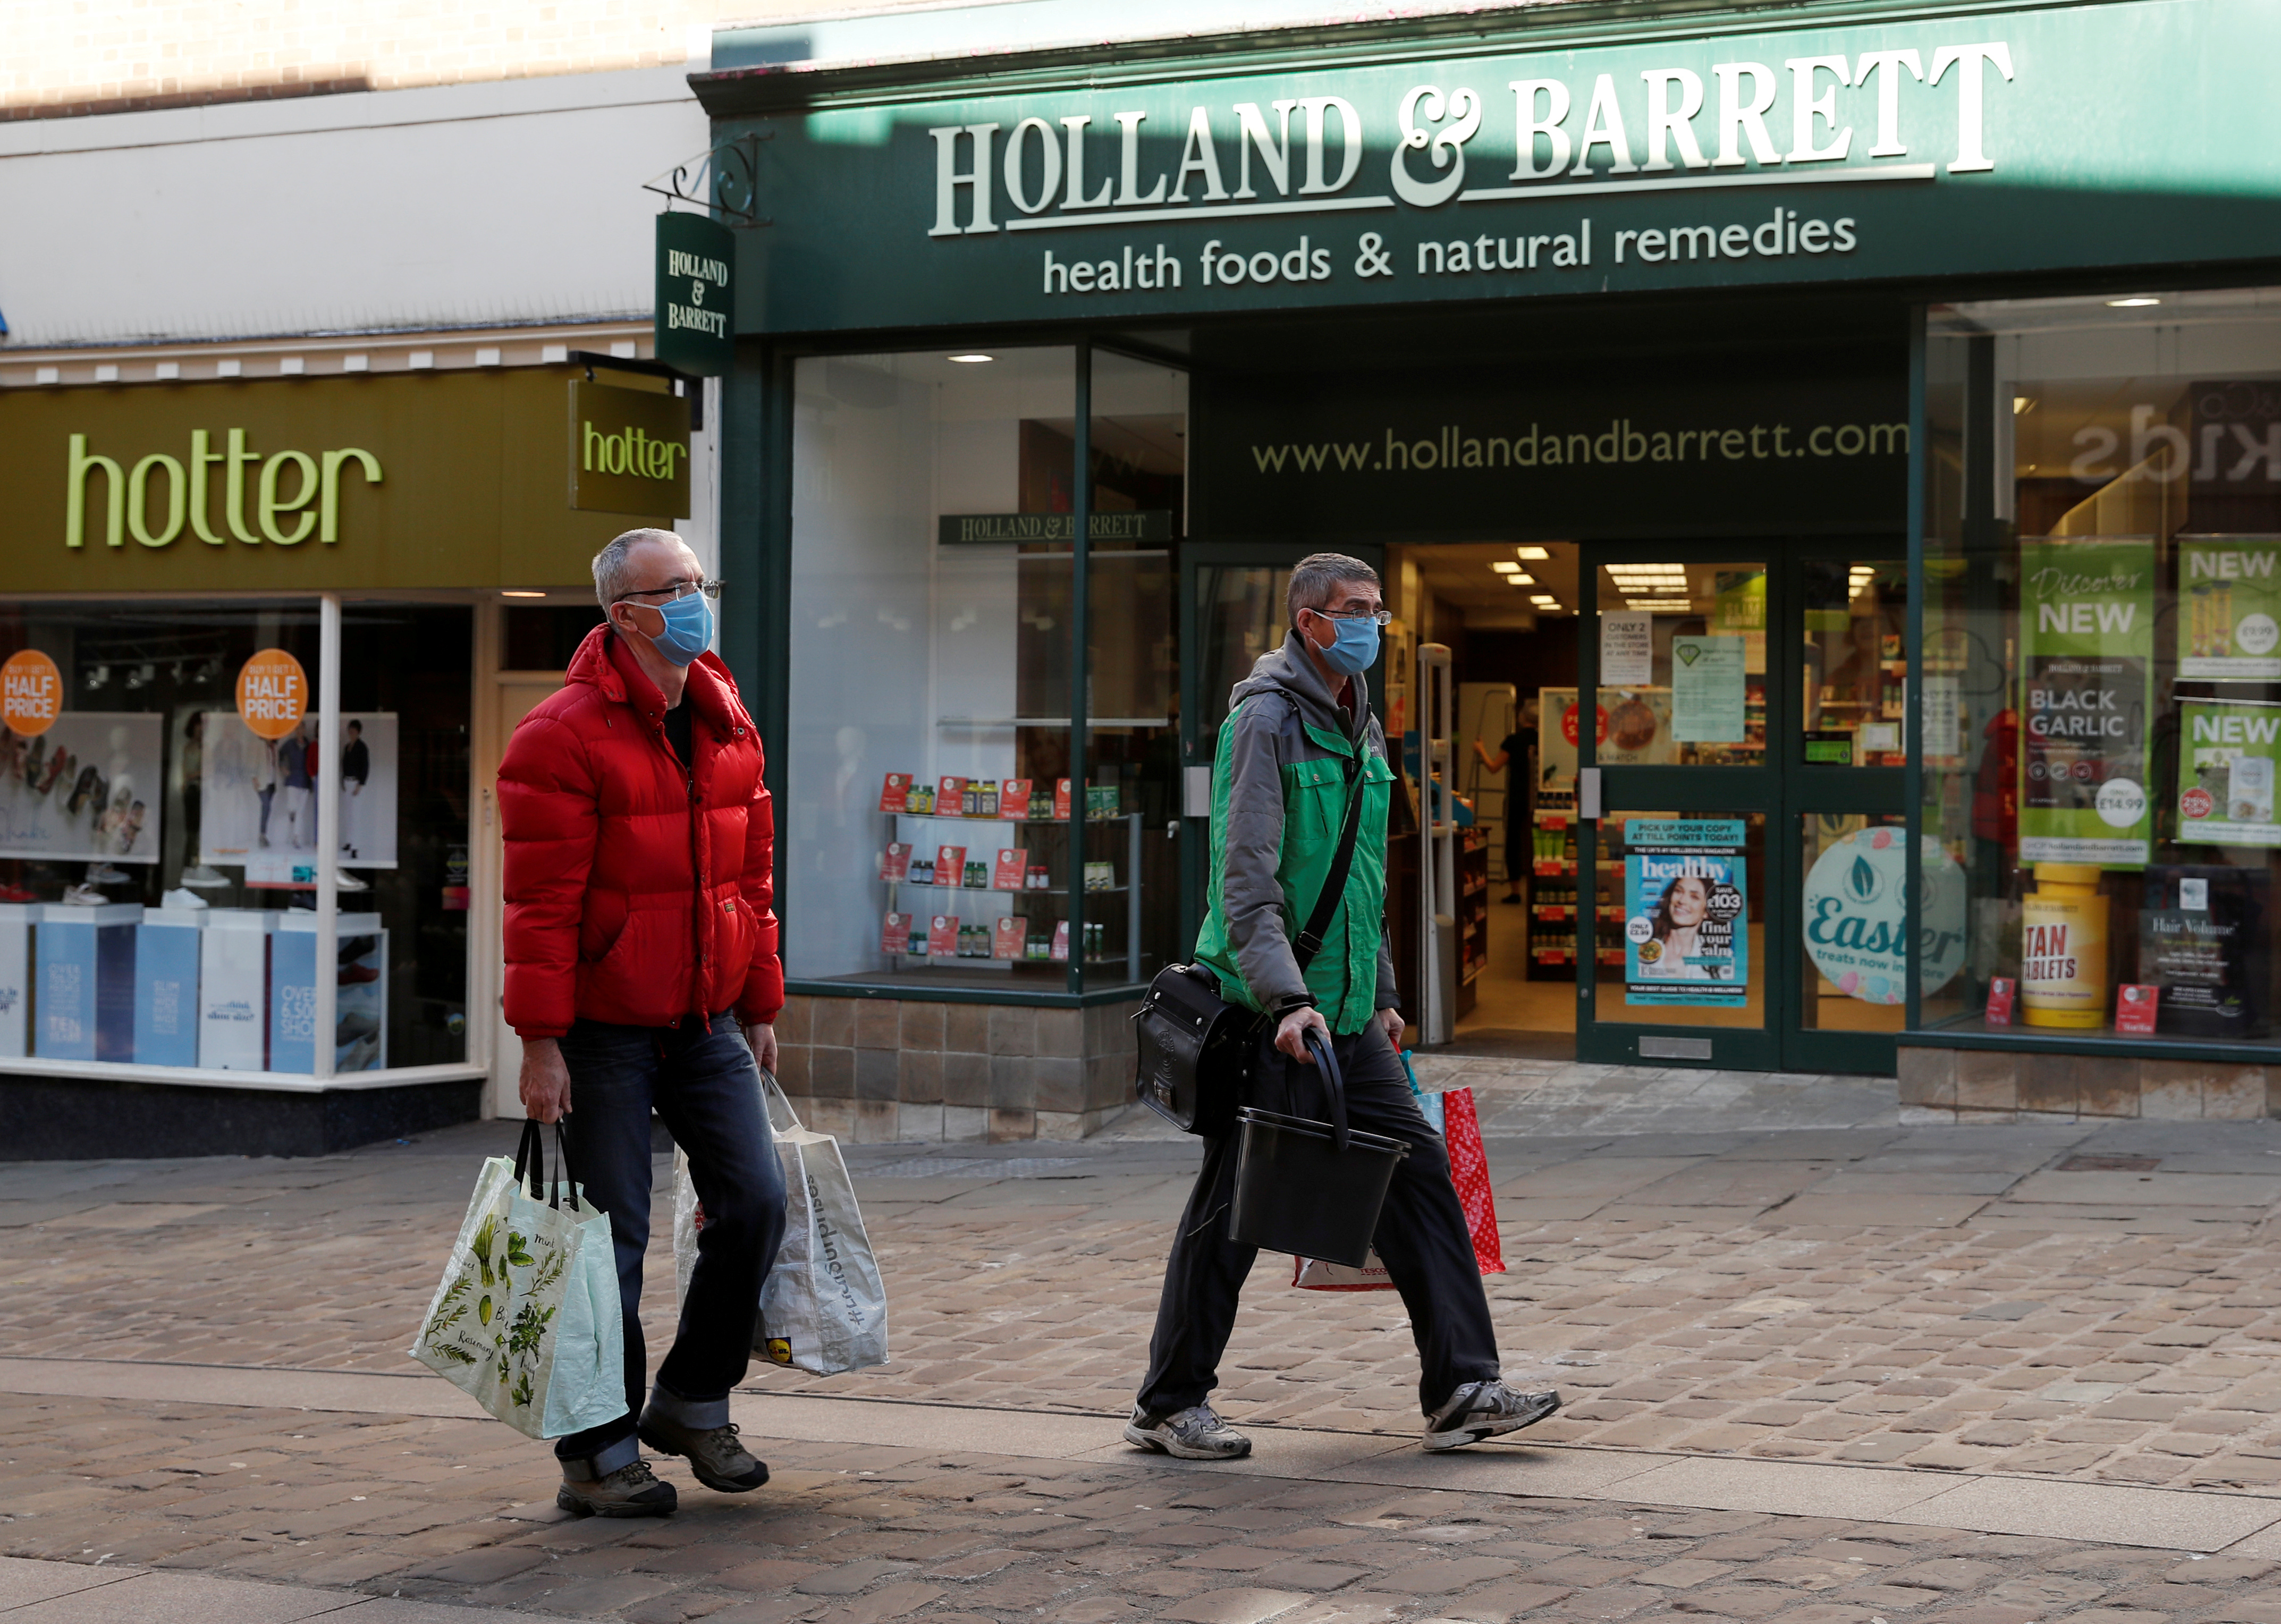 People wearing protective face masks are seen outside a Holland & Barrett store in Durham, as the spread of the coronavirus disease (COVID-19) continues, Durham, Britain